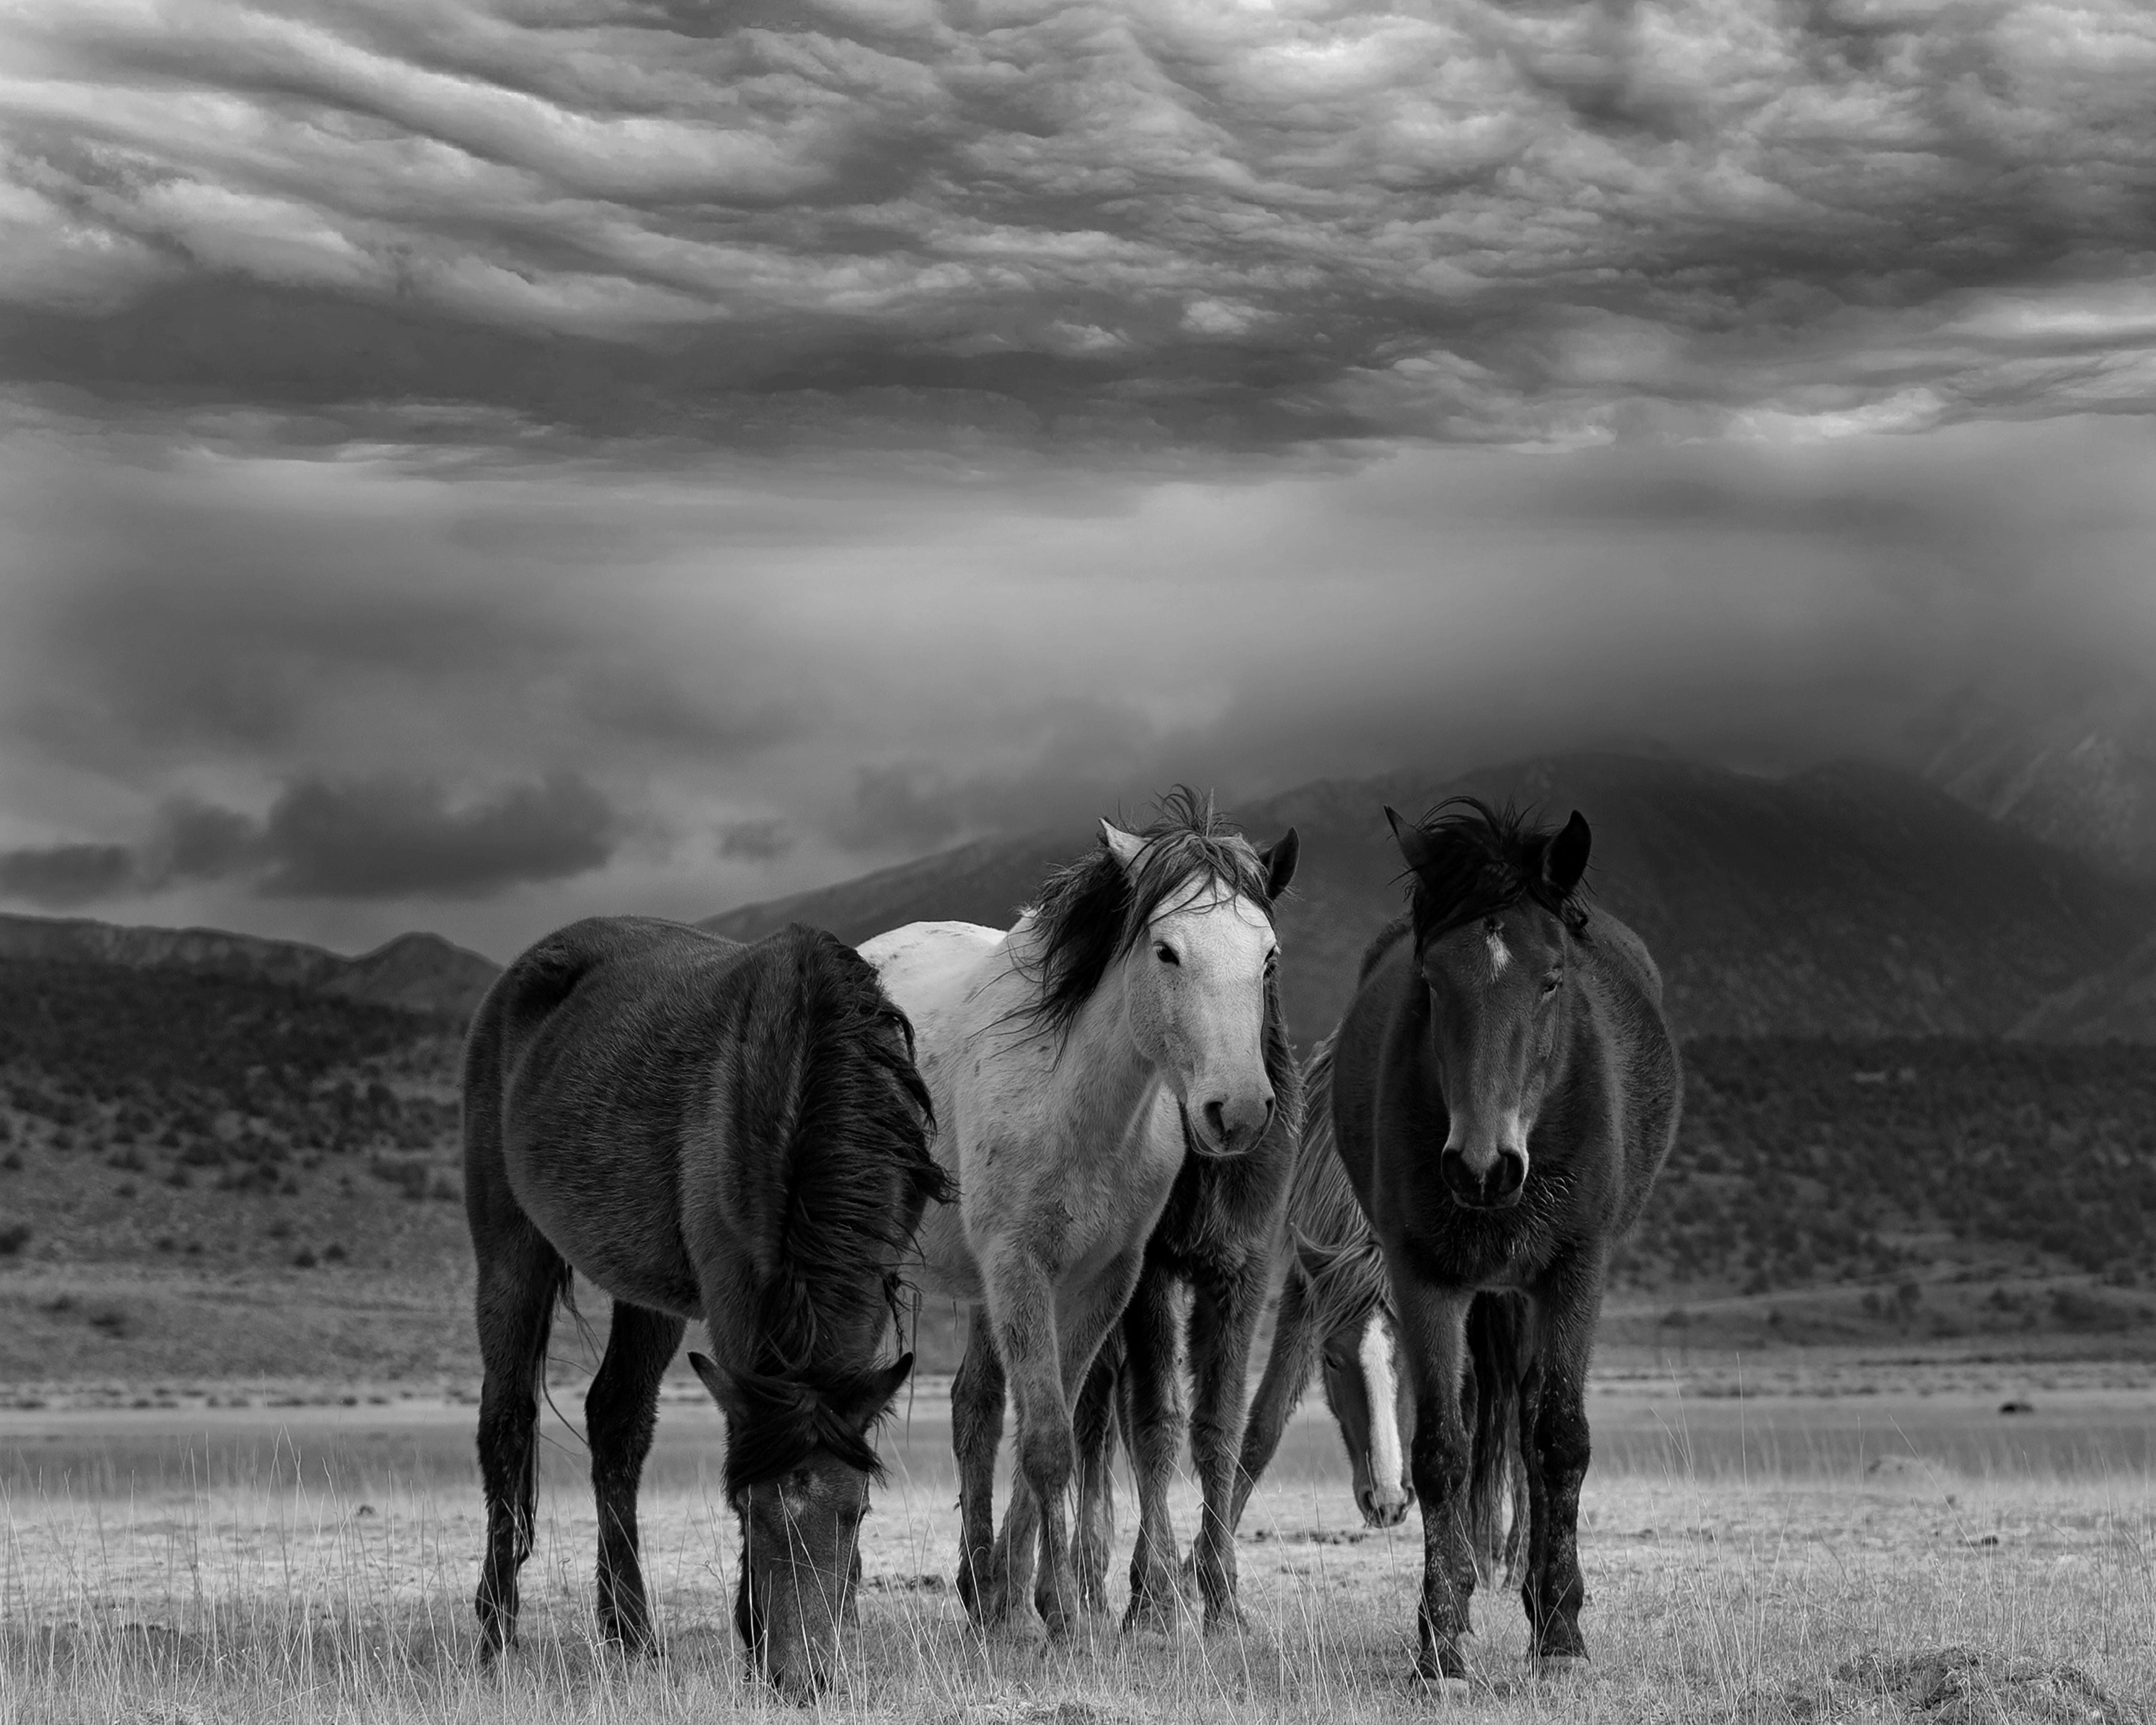 Shane Russeck Animal Print - "Dust and Horses" 40x50 Black and White Photography Wild Horses Mustangs Art